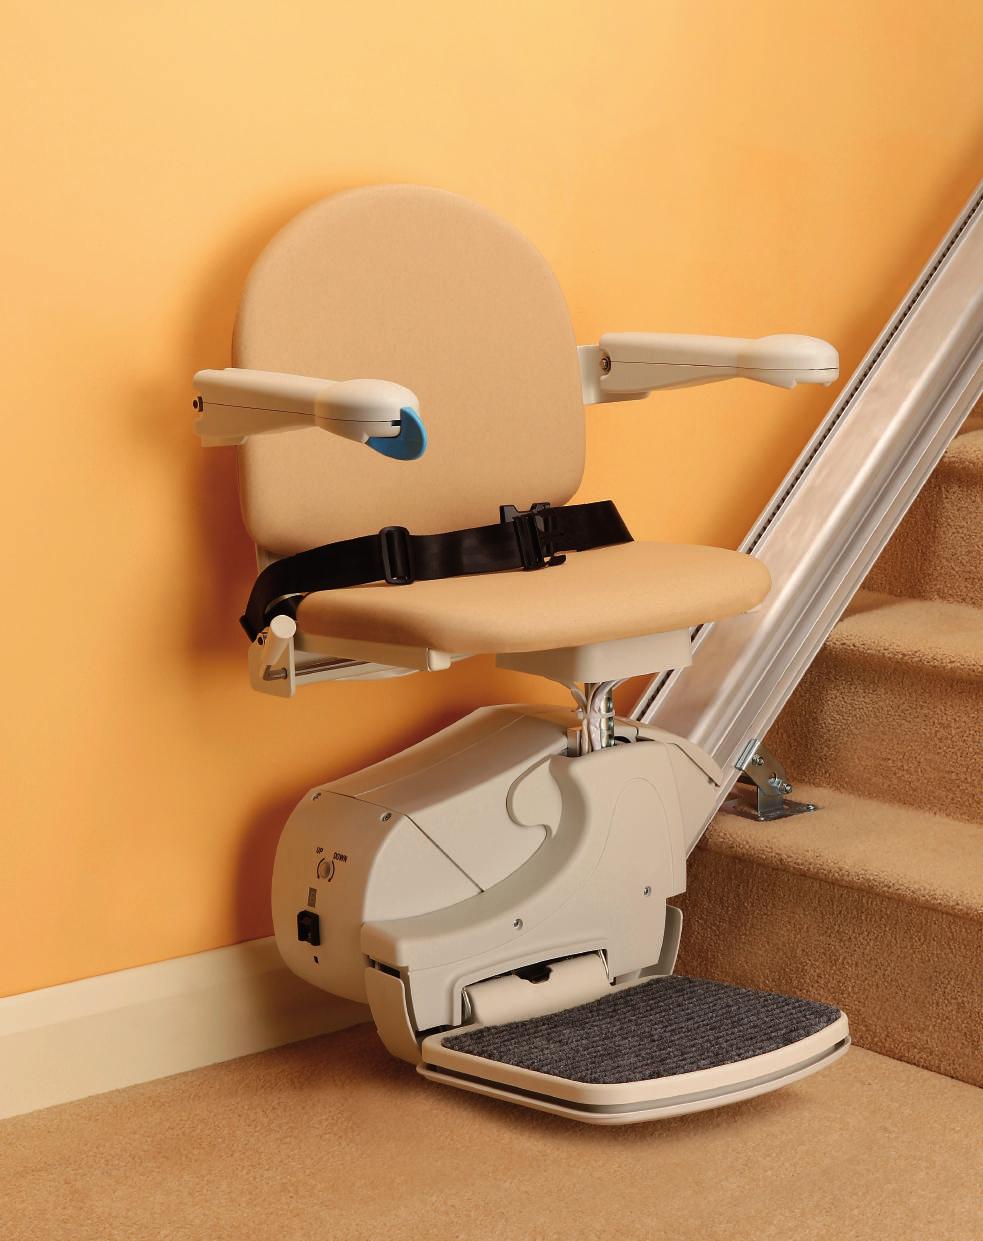 Simplicity Straight stairlift If you do not require powered swivel options, and you have a straight staircase, the Simplicity offers you a safe and cost effective way to overcome the challenge of